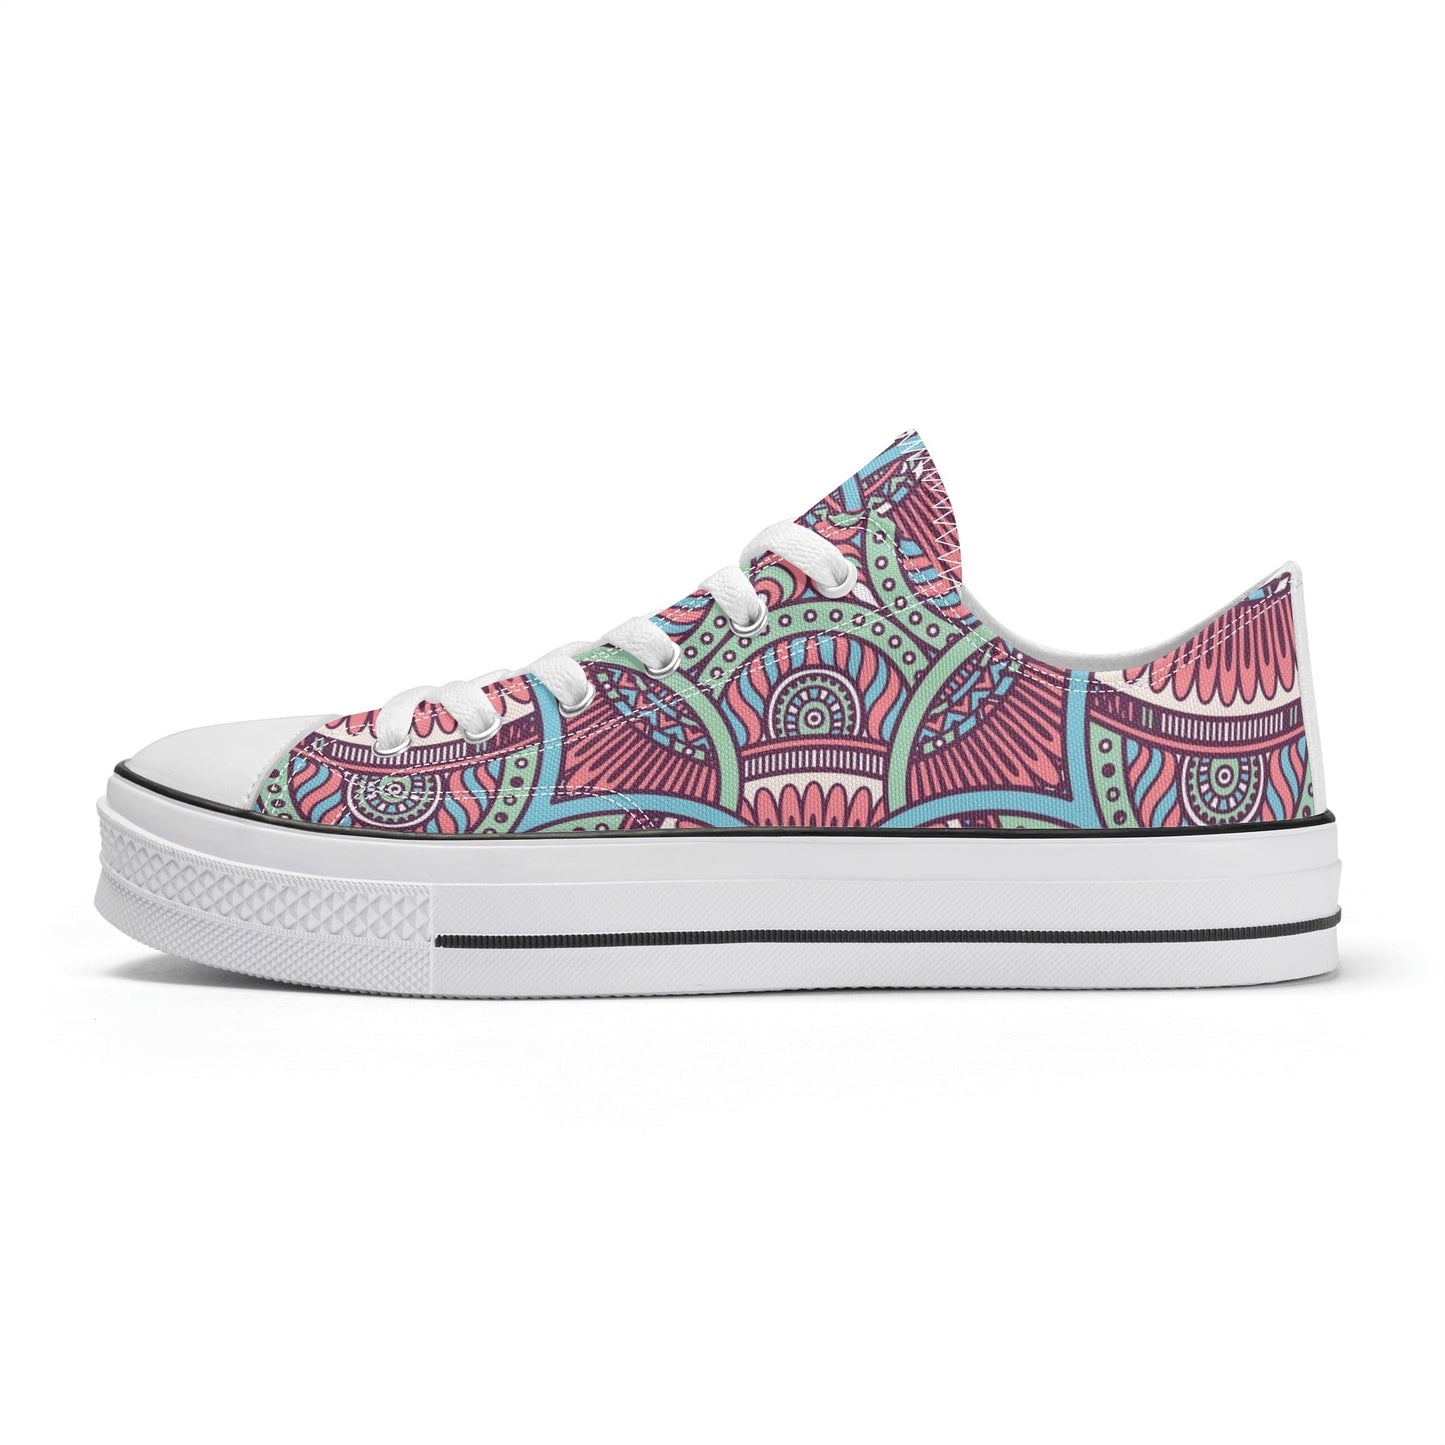 Mandala Pattern - Womens Classic Low Top Canvas Shoes for Footwear Lovers